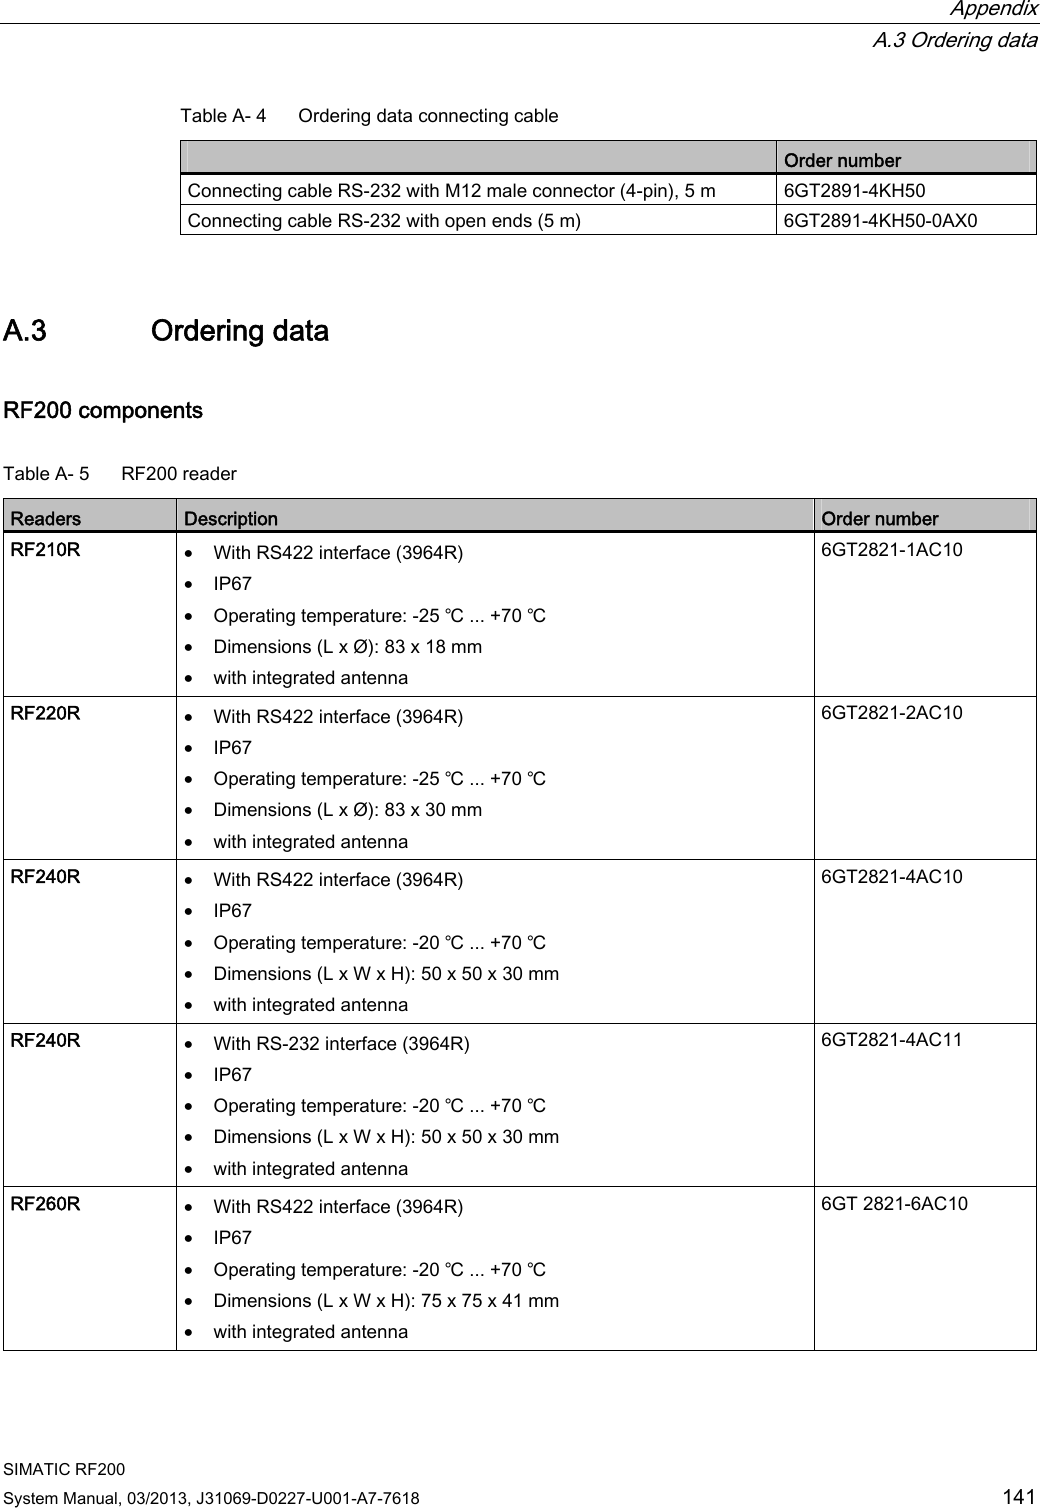  Appendix  A.3 Ordering data SIMATIC RF200 System Manual, 03/2013, J31069-D0227-U001-A7-7618  141 Table A- 4  Ordering data connecting cable  Order number Connecting cable RS-232 with M12 male connector (4-pin), 5 m  6GT2891-4KH50 Connecting cable RS-232 with open ends (5 m)  6GT2891-4KH50-0AX0 A.3 Ordering data RF200 components  Table A- 5  RF200 reader  Readers  Description  Order number RF210R • With RS422 interface (3964R) • IP67 • Operating temperature: -25 ℃ ... +70 ℃ • Dimensions (L x Ø): 83 x 18 mm • with integrated antenna 6GT2821-1AC10 RF220R • With RS422 interface (3964R) • IP67 • Operating temperature: -25 ℃ ... +70 ℃ • Dimensions (L x Ø): 83 x 30 mm • with integrated antenna 6GT2821-2AC10 RF240R • With RS422 interface (3964R) • IP67 • Operating temperature: -20 ℃ ... +70 ℃ • Dimensions (L x W x H): 50 x 50 x 30 mm • with integrated antenna 6GT2821-4AC10 RF240R • With RS-232 interface (3964R) • IP67 • Operating temperature: -20 ℃ ... +70 ℃ • Dimensions (L x W x H): 50 x 50 x 30 mm • with integrated antenna 6GT2821-4AC11 RF260R • With RS422 interface (3964R) • IP67 • Operating temperature: -20 ℃ ... +70 ℃ • Dimensions (L x W x H): 75 x 75 x 41 mm • with integrated antenna 6GT 2821-6AC10 